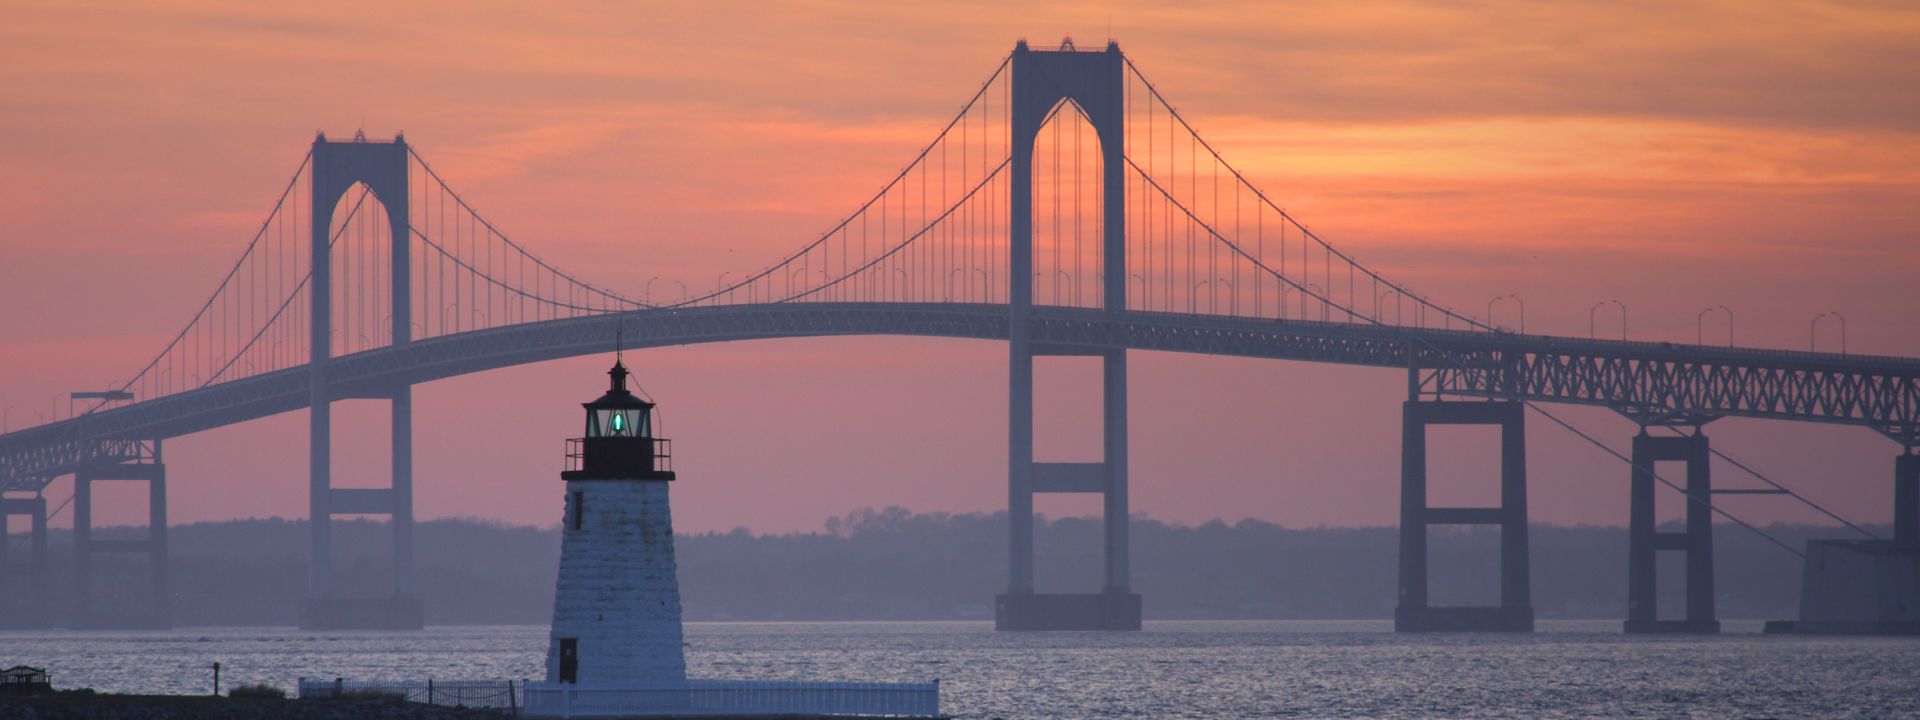 A lighthouse in front of the Claiborne Pell Bridge at sunset.